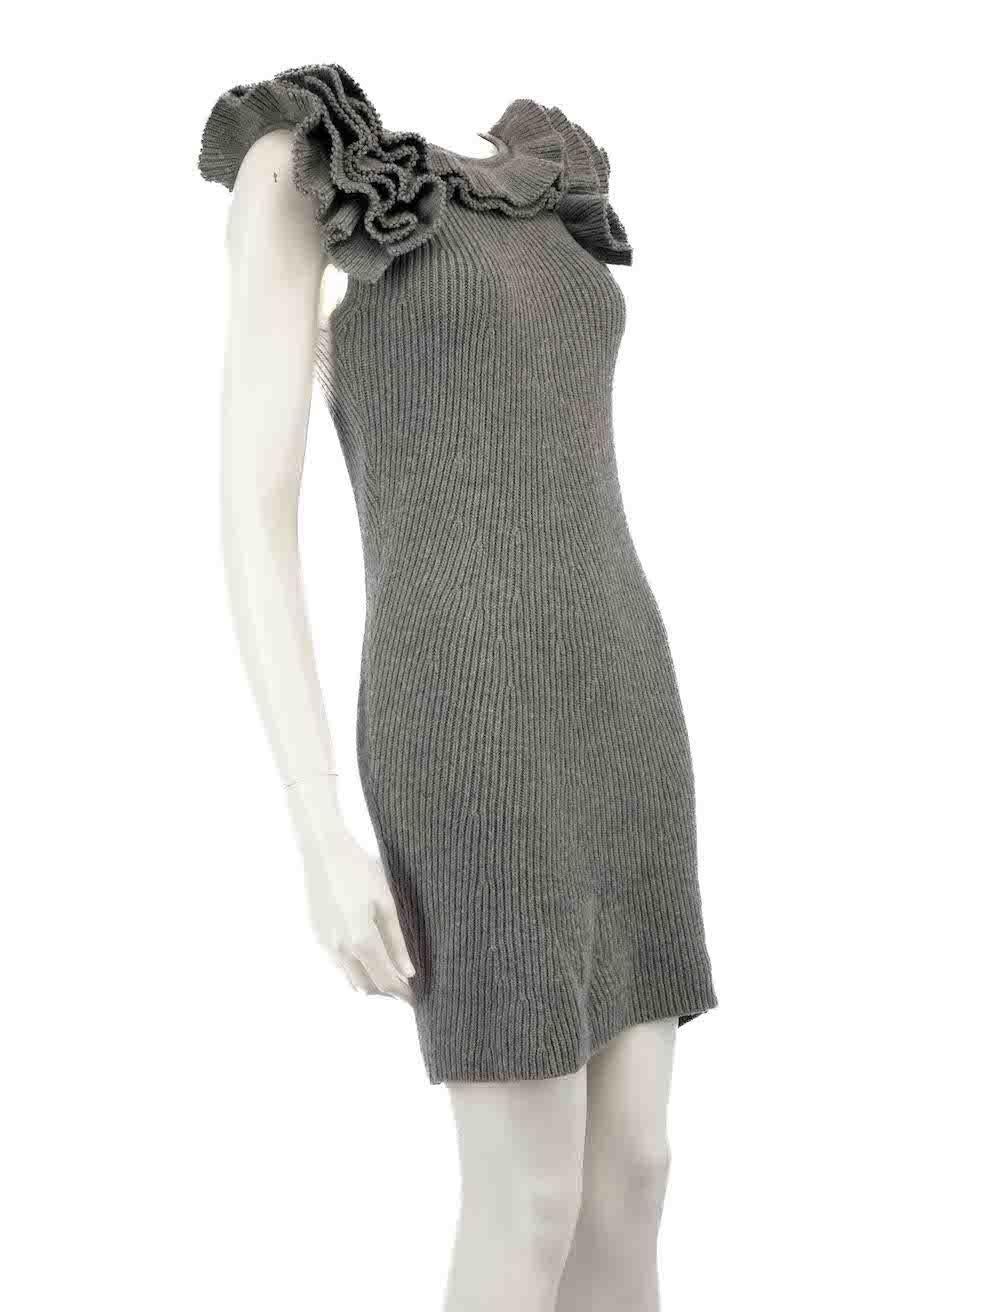 CONDITION is Very good. Hardly any visible wear to dress is evident on this used Fendi designer resale item.
 
 
 
 Details
 
 
 Grey
 
 Wool
 
 Knit dress
 
 Mini
 
 Sleeveless
 
 Ruffle detail
 
 Round neck
 
 
 
 
 
 Made in Italy
 
 
 
